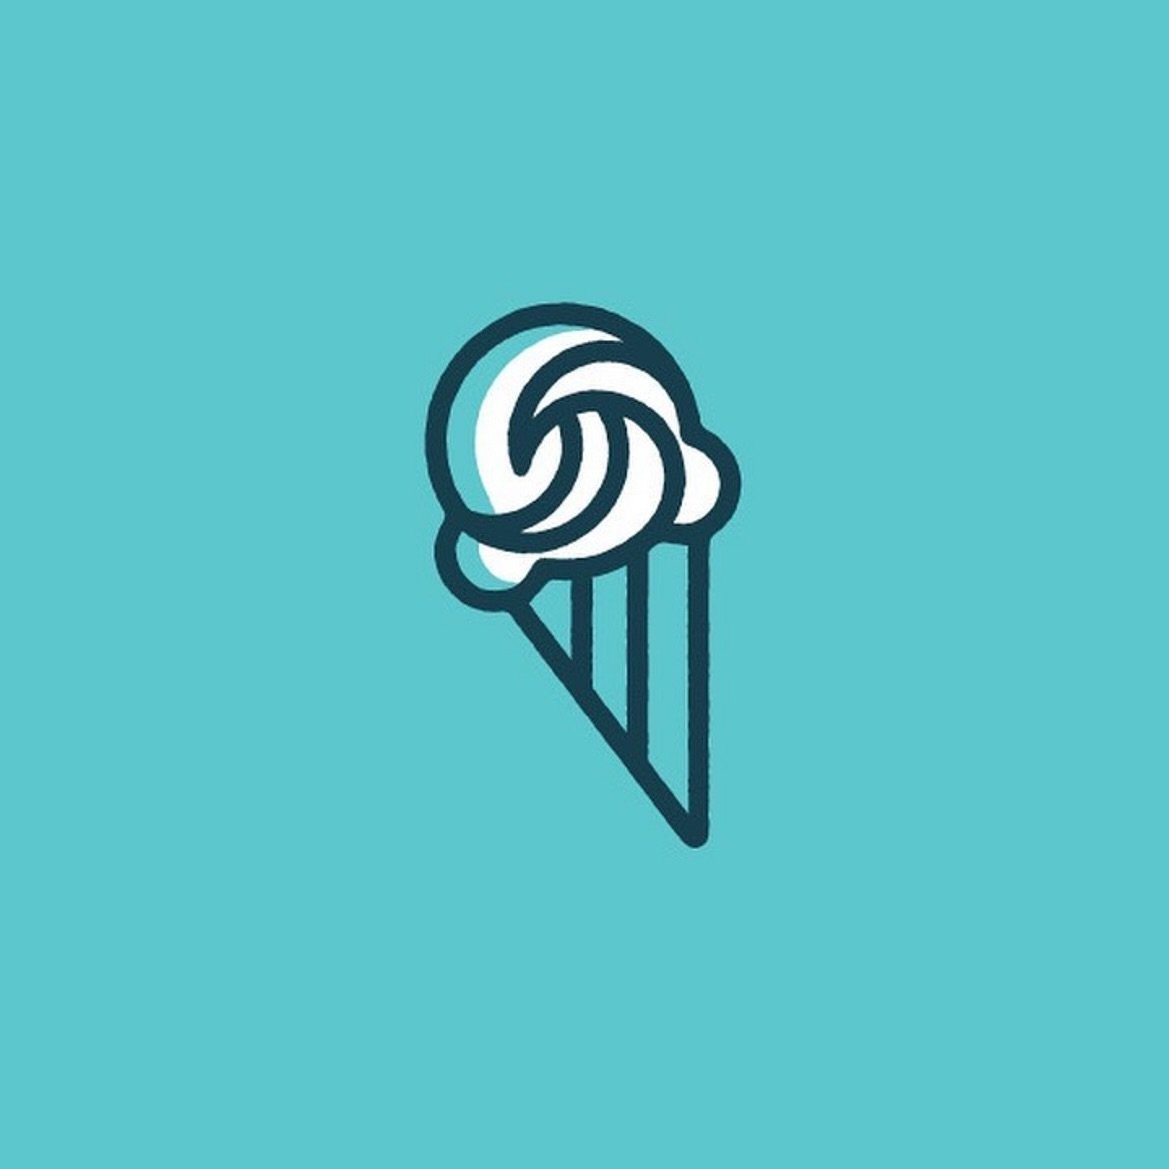 Throwin &lsquo;er back to 2017? Still one of my favourite logos for a company called Best Coast Ice Cream.

&hellip;aaaaand I scooped up last minute tickets to @postalservicemusic , so if you were an angsty hesh like me you&rsquo;ll appreciate the tu